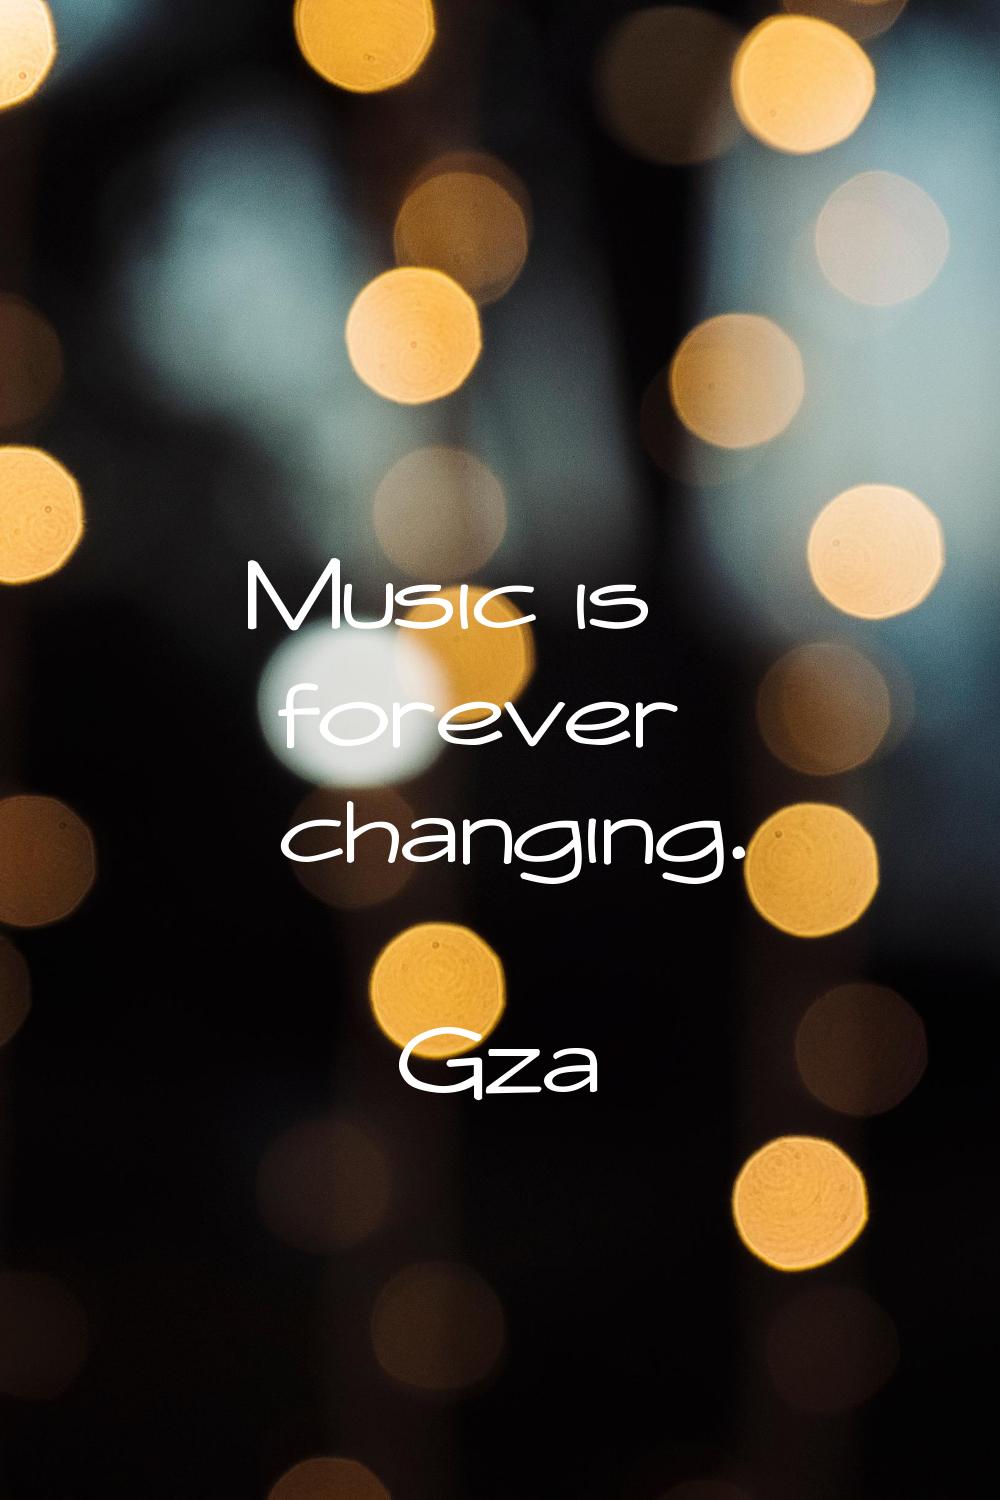 Music is forever changing.